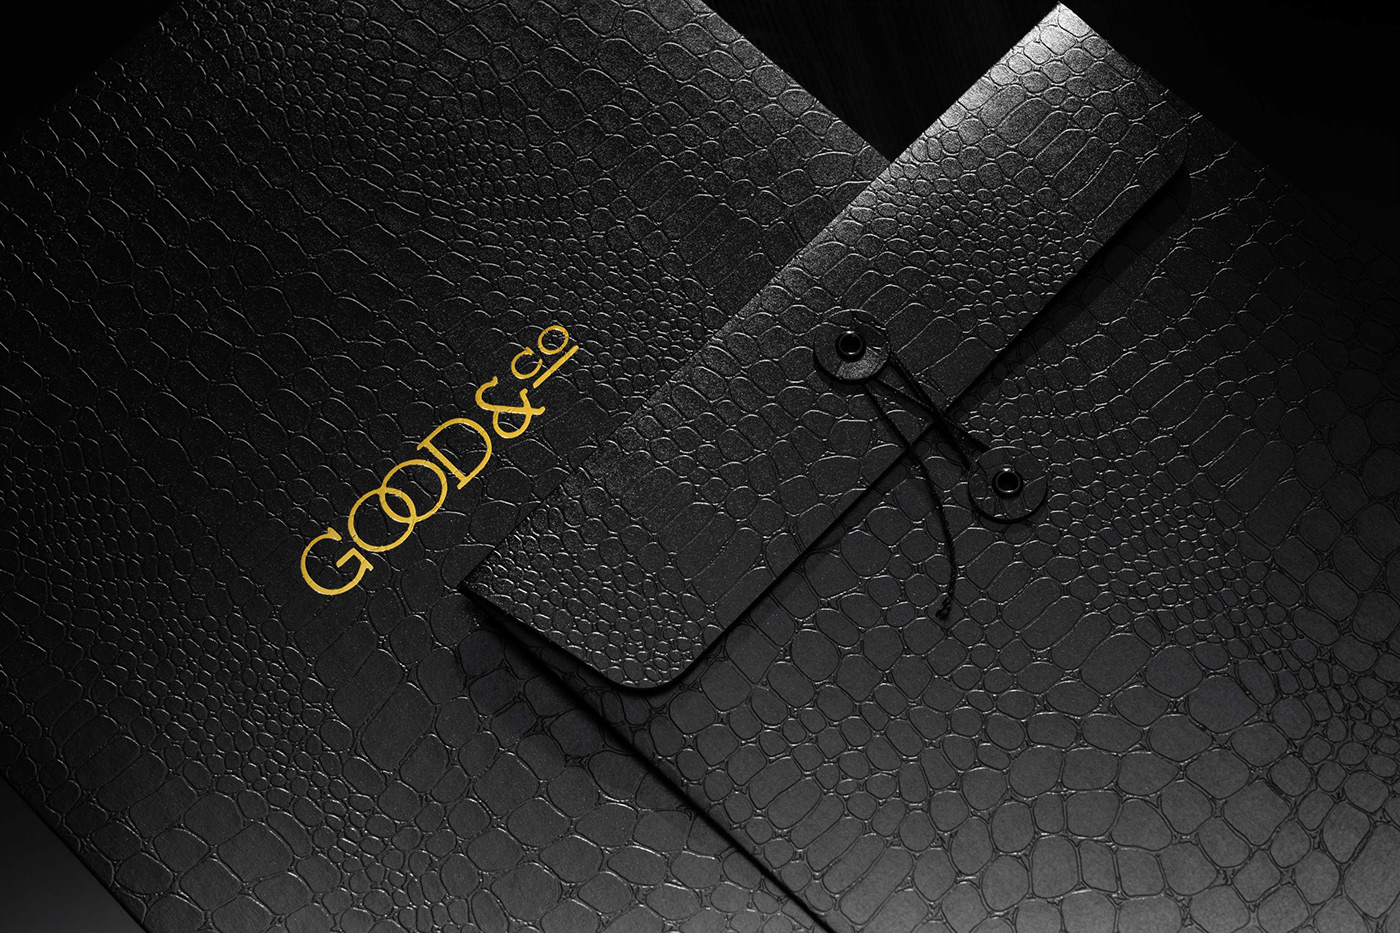 2 black envelopes with all over reptile texture and gold logo detailing